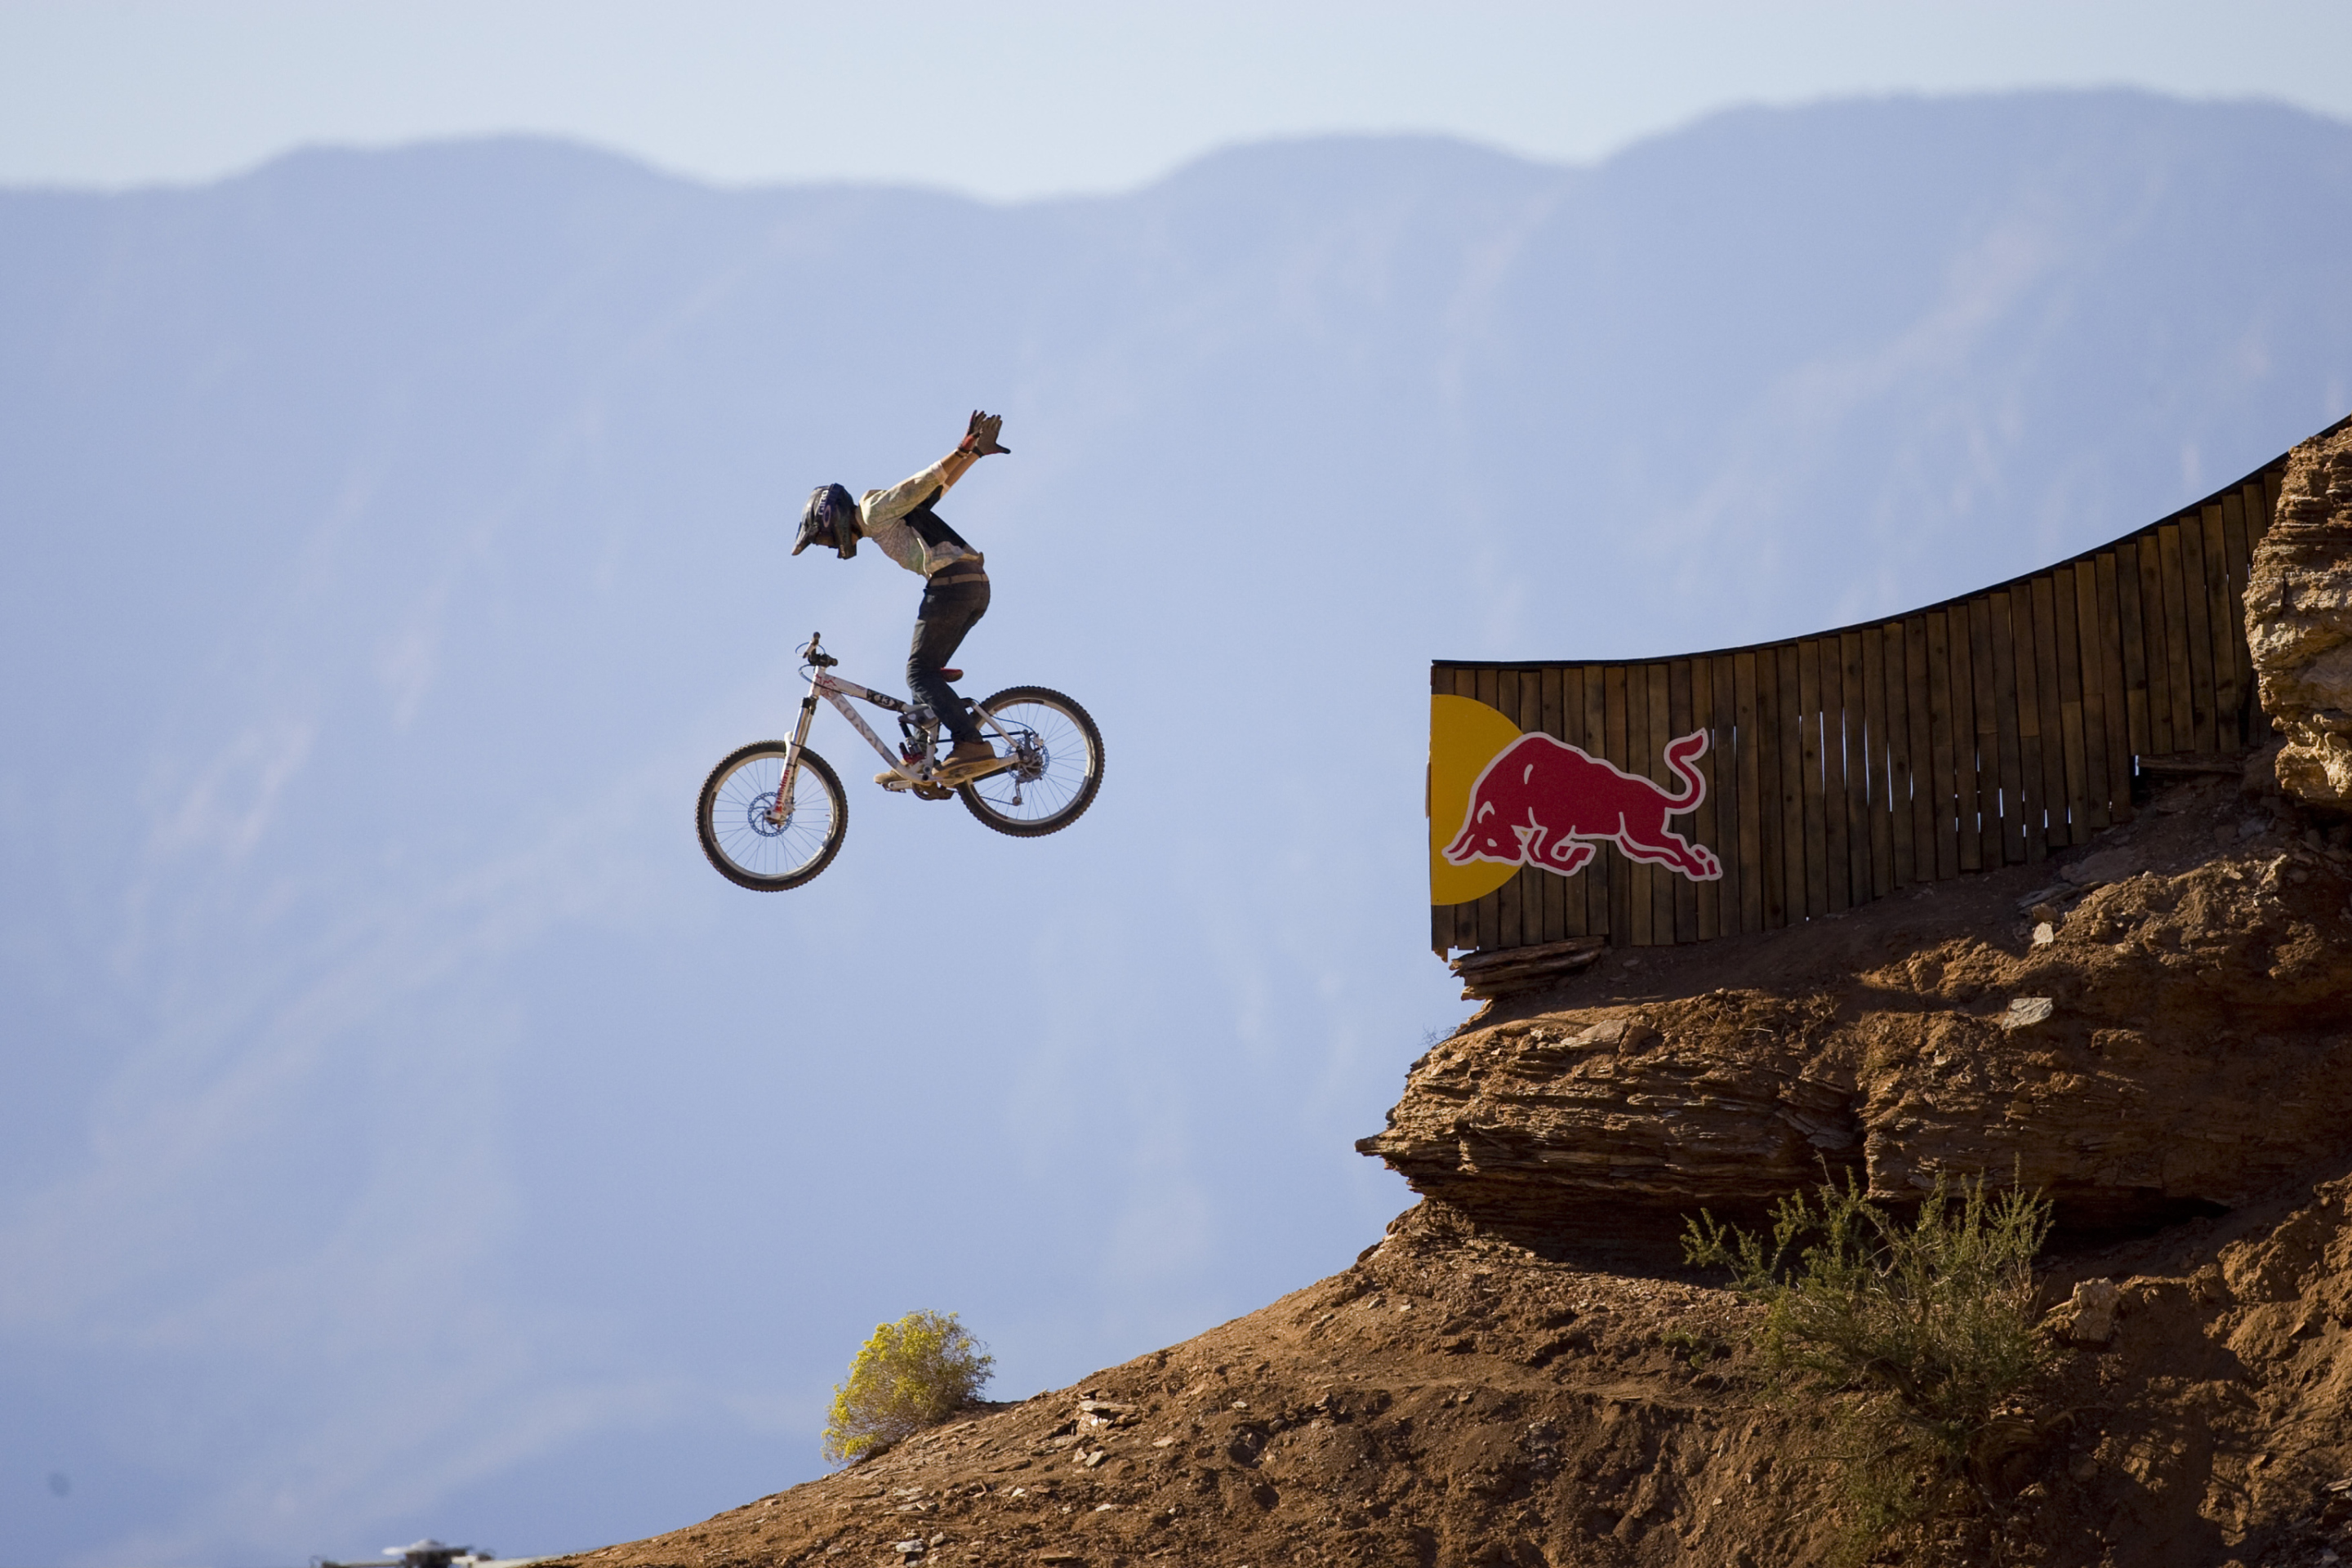 Red Bull Extreme Bicyclist wallpaper 2880x1920